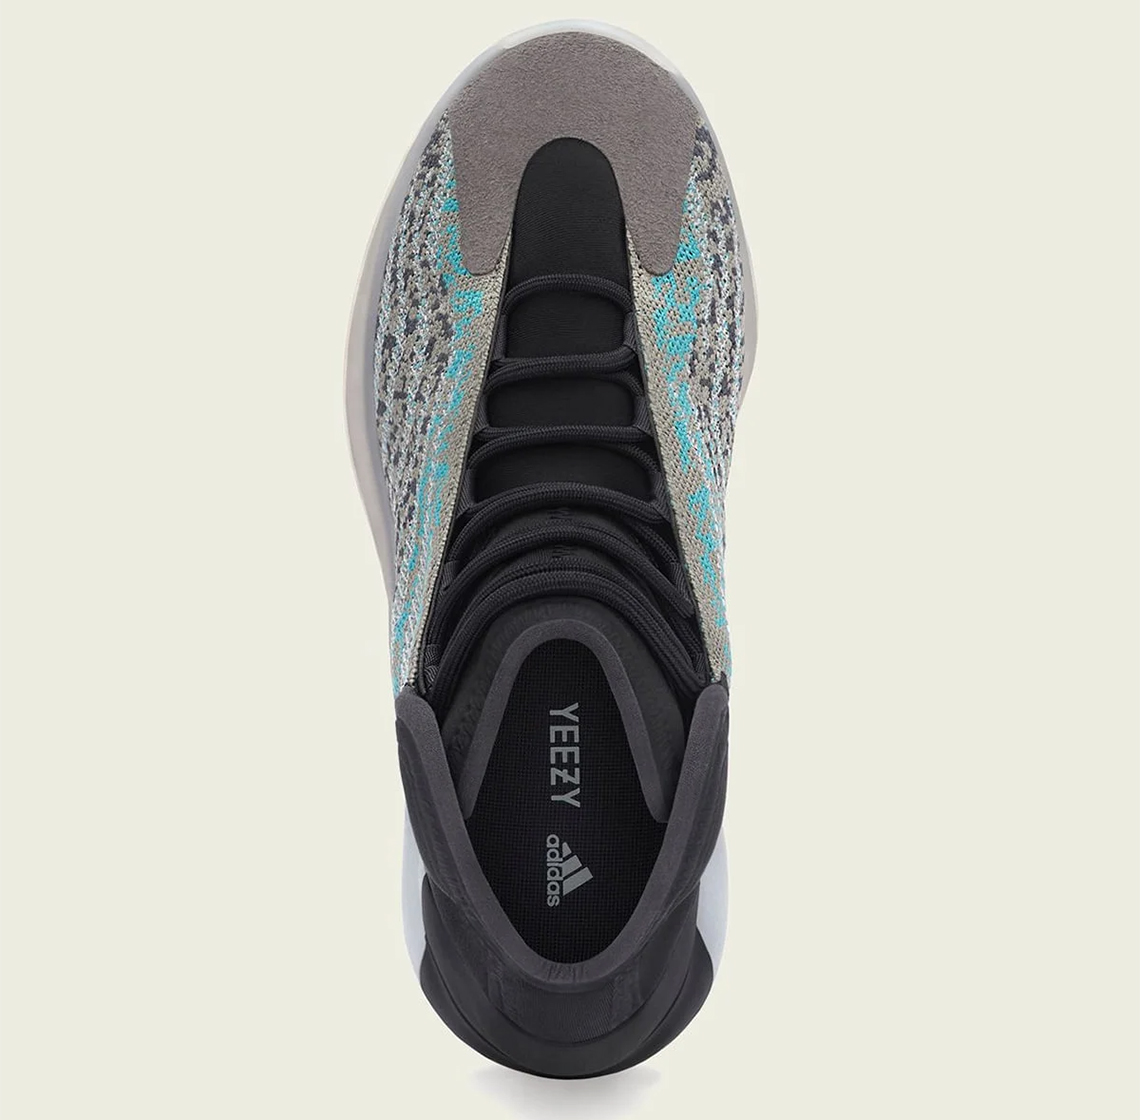 Adidas Yeezy Quantum Teal Blue G58864 Release Date 4